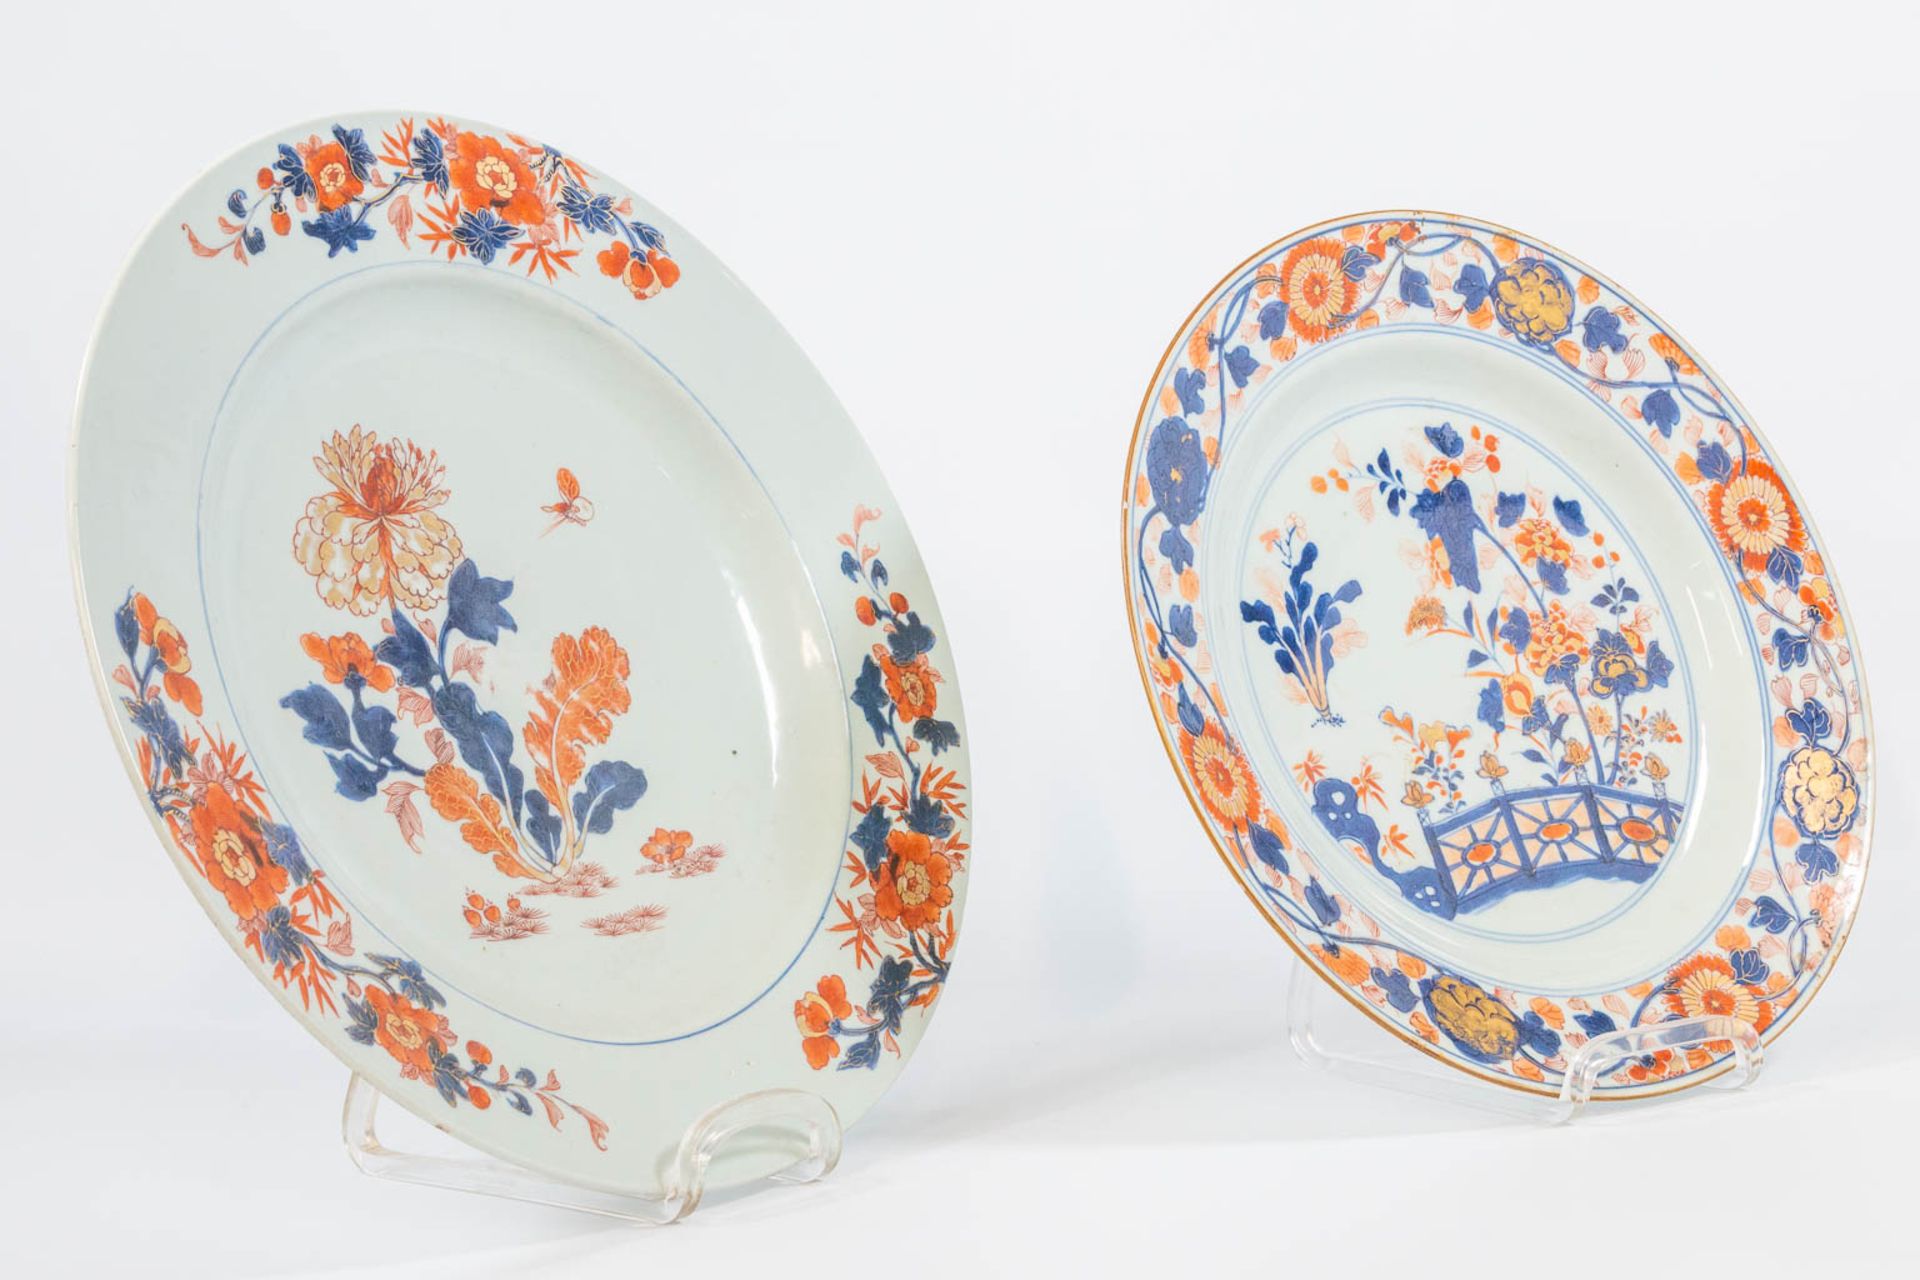 A collection of 6 famille rose objects and plates, made of porcelain. - Image 22 of 24